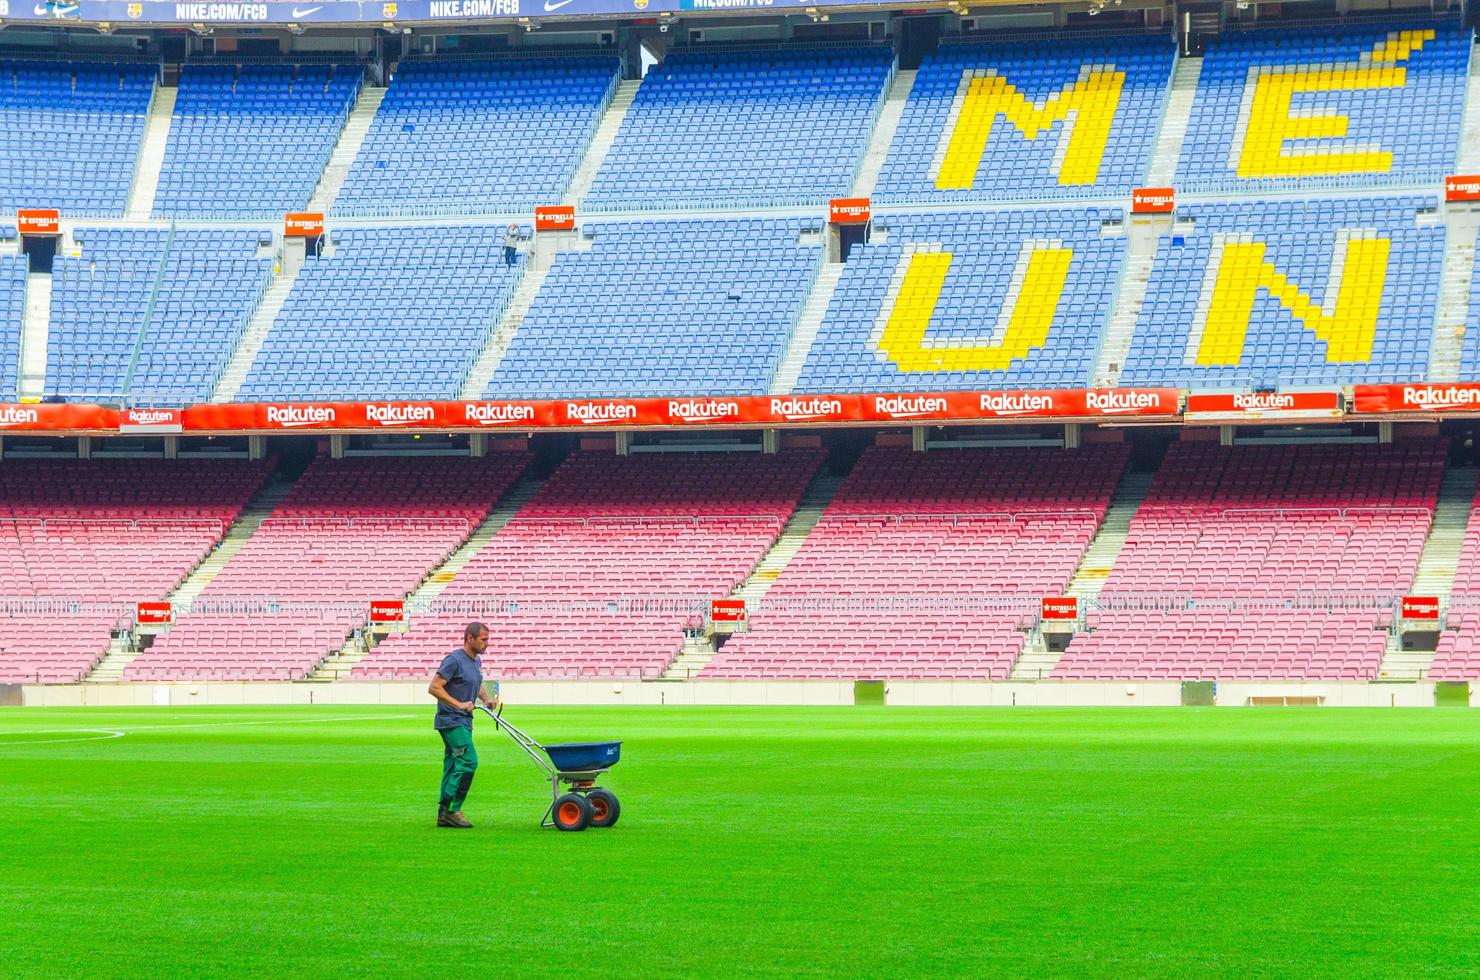 Barcelona, Spain, March 14, 2019 worker is seeding grass with fertilizer spreader on lawn of Camp Nou green field, tribunes stands background. Stadium of football club Barcelona photo